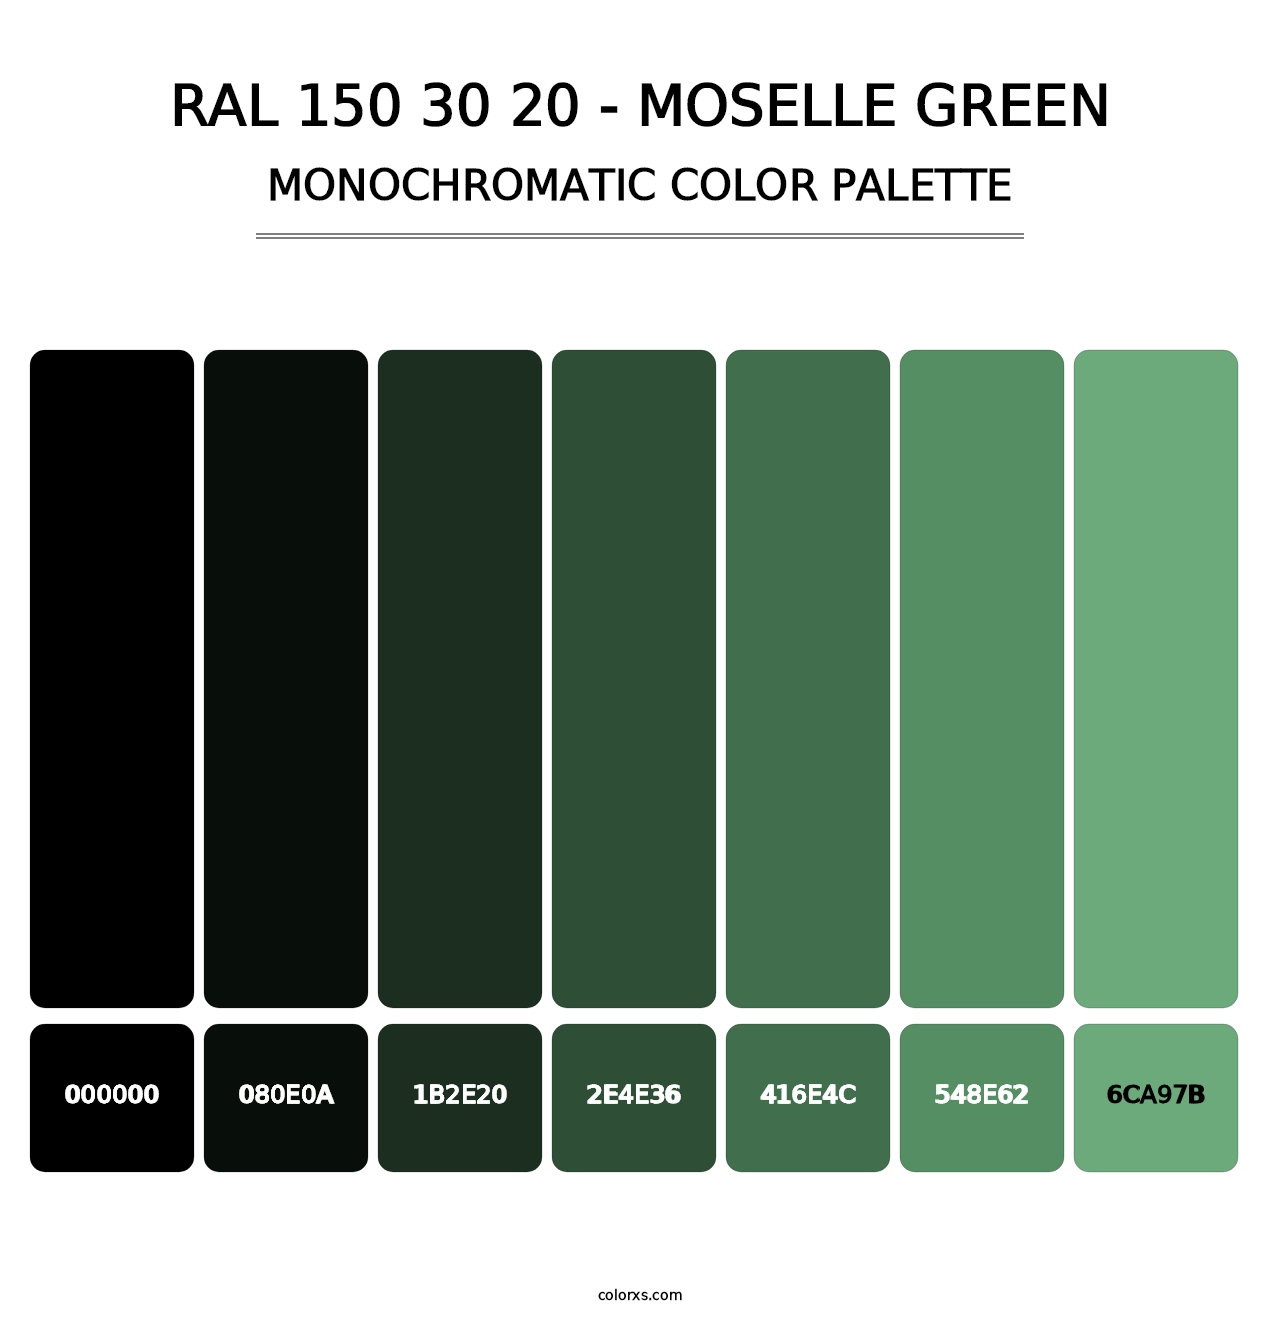 RAL 150 30 20 - Moselle Green - Monochromatic Color Palette